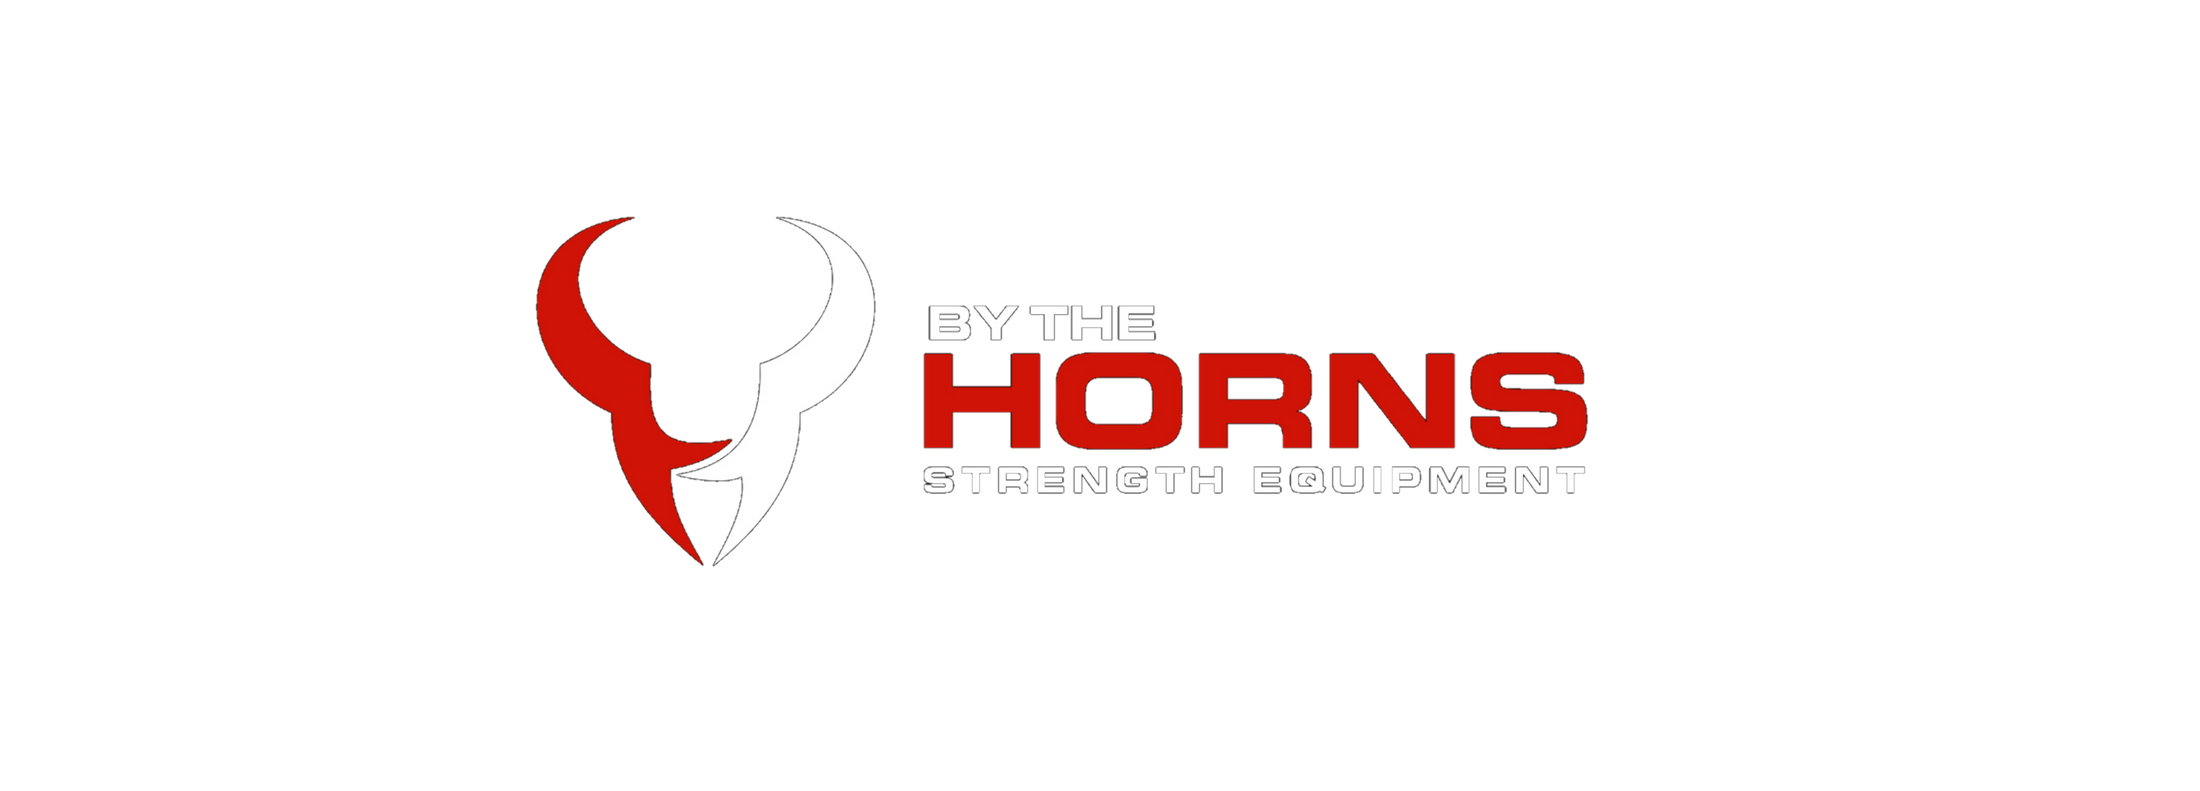 By The Horns Strength Equipment